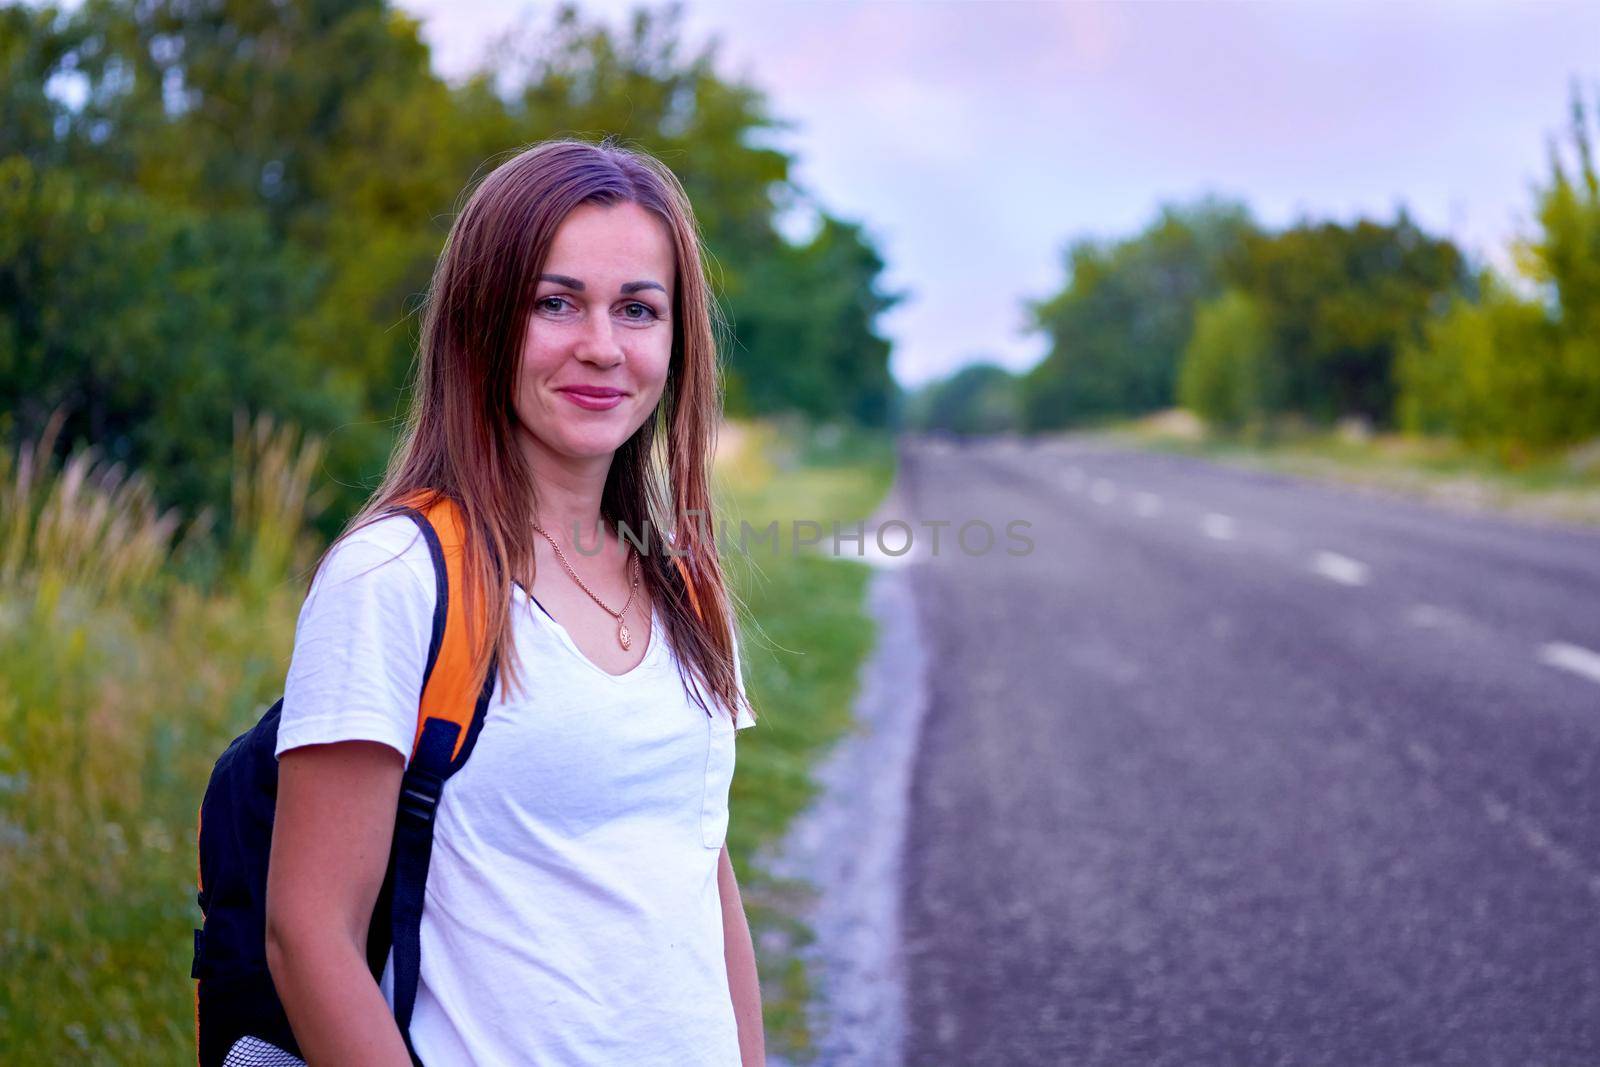 Young traveling cheerful girl stands waiting by the asphalt road with trees by jovani68